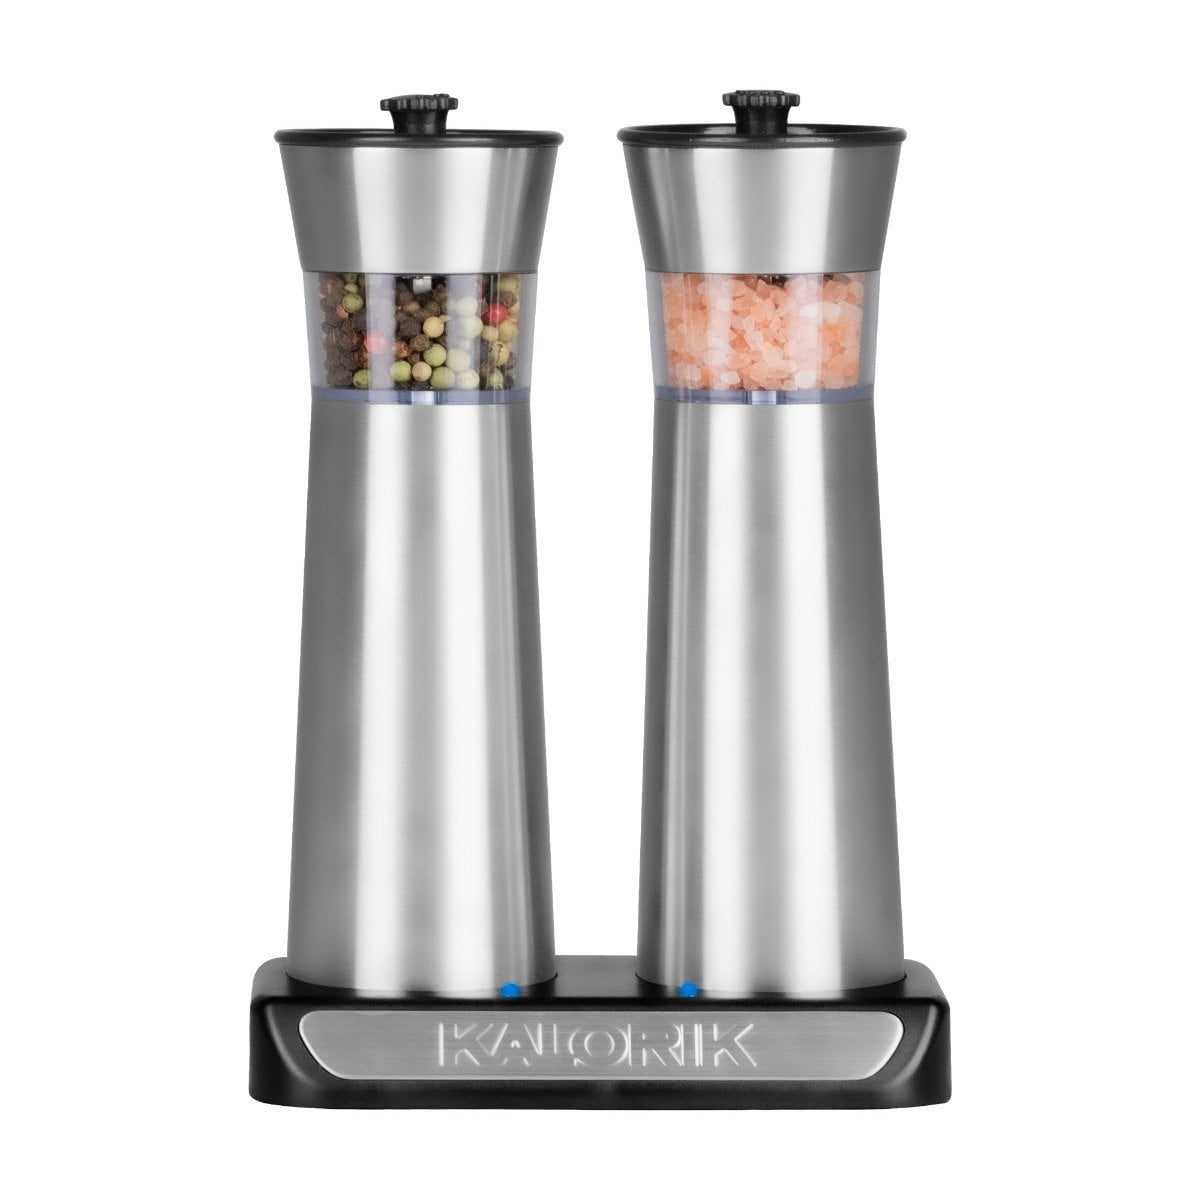 Gravity Electric Salt and Pepper Grinder Set - USB Rechargeable